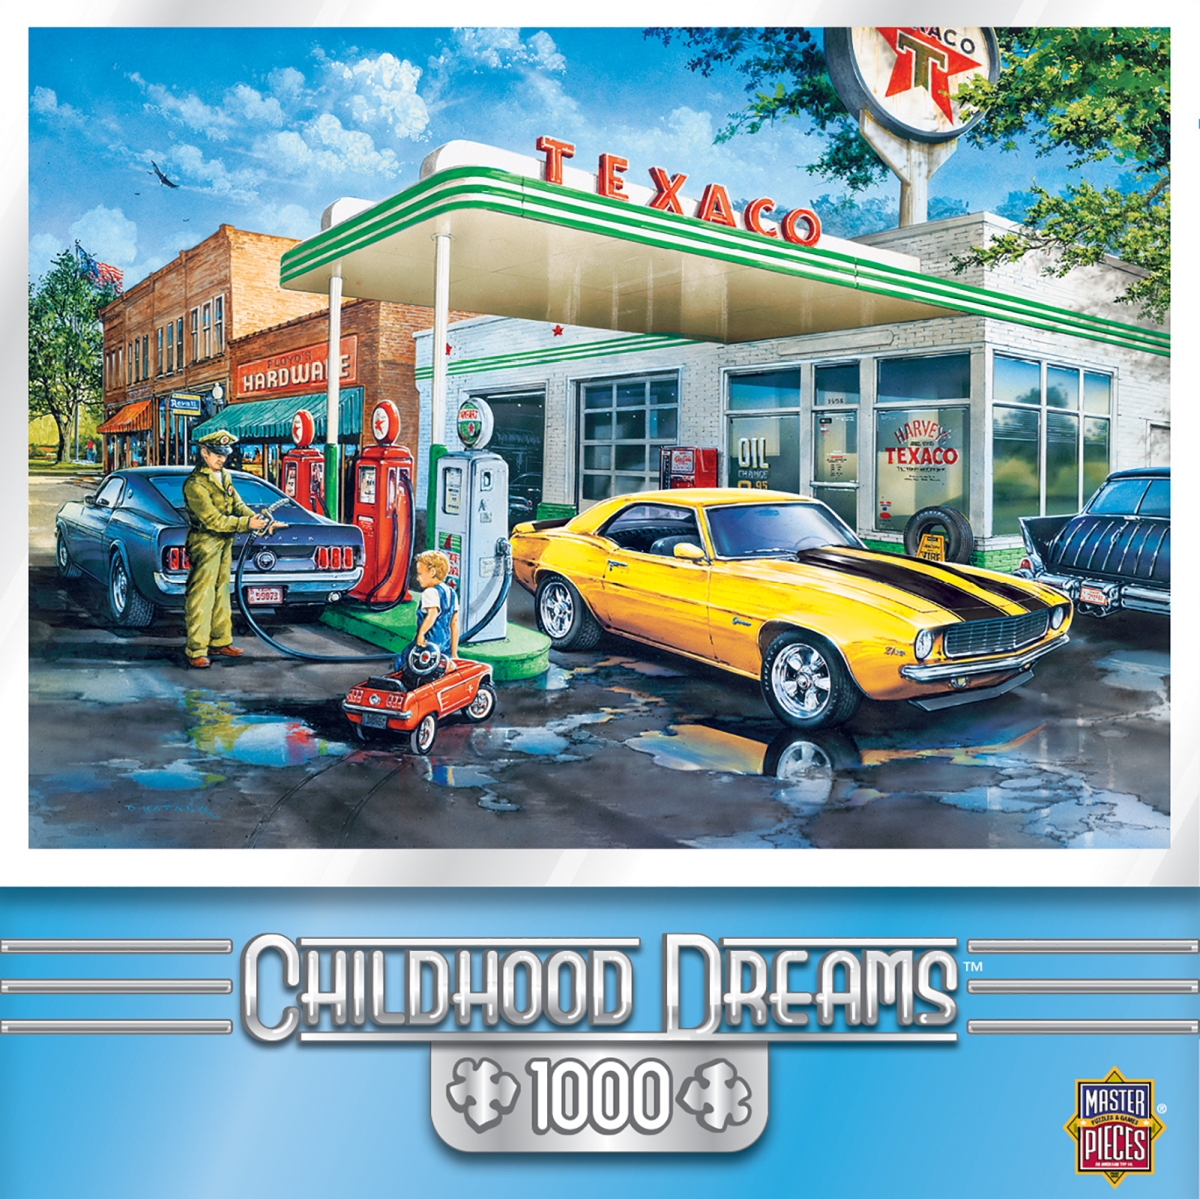 71646 19.25 X 26.75 In. Childhood Dreams Pops Quick Stop Puzzle - 1000 Piece